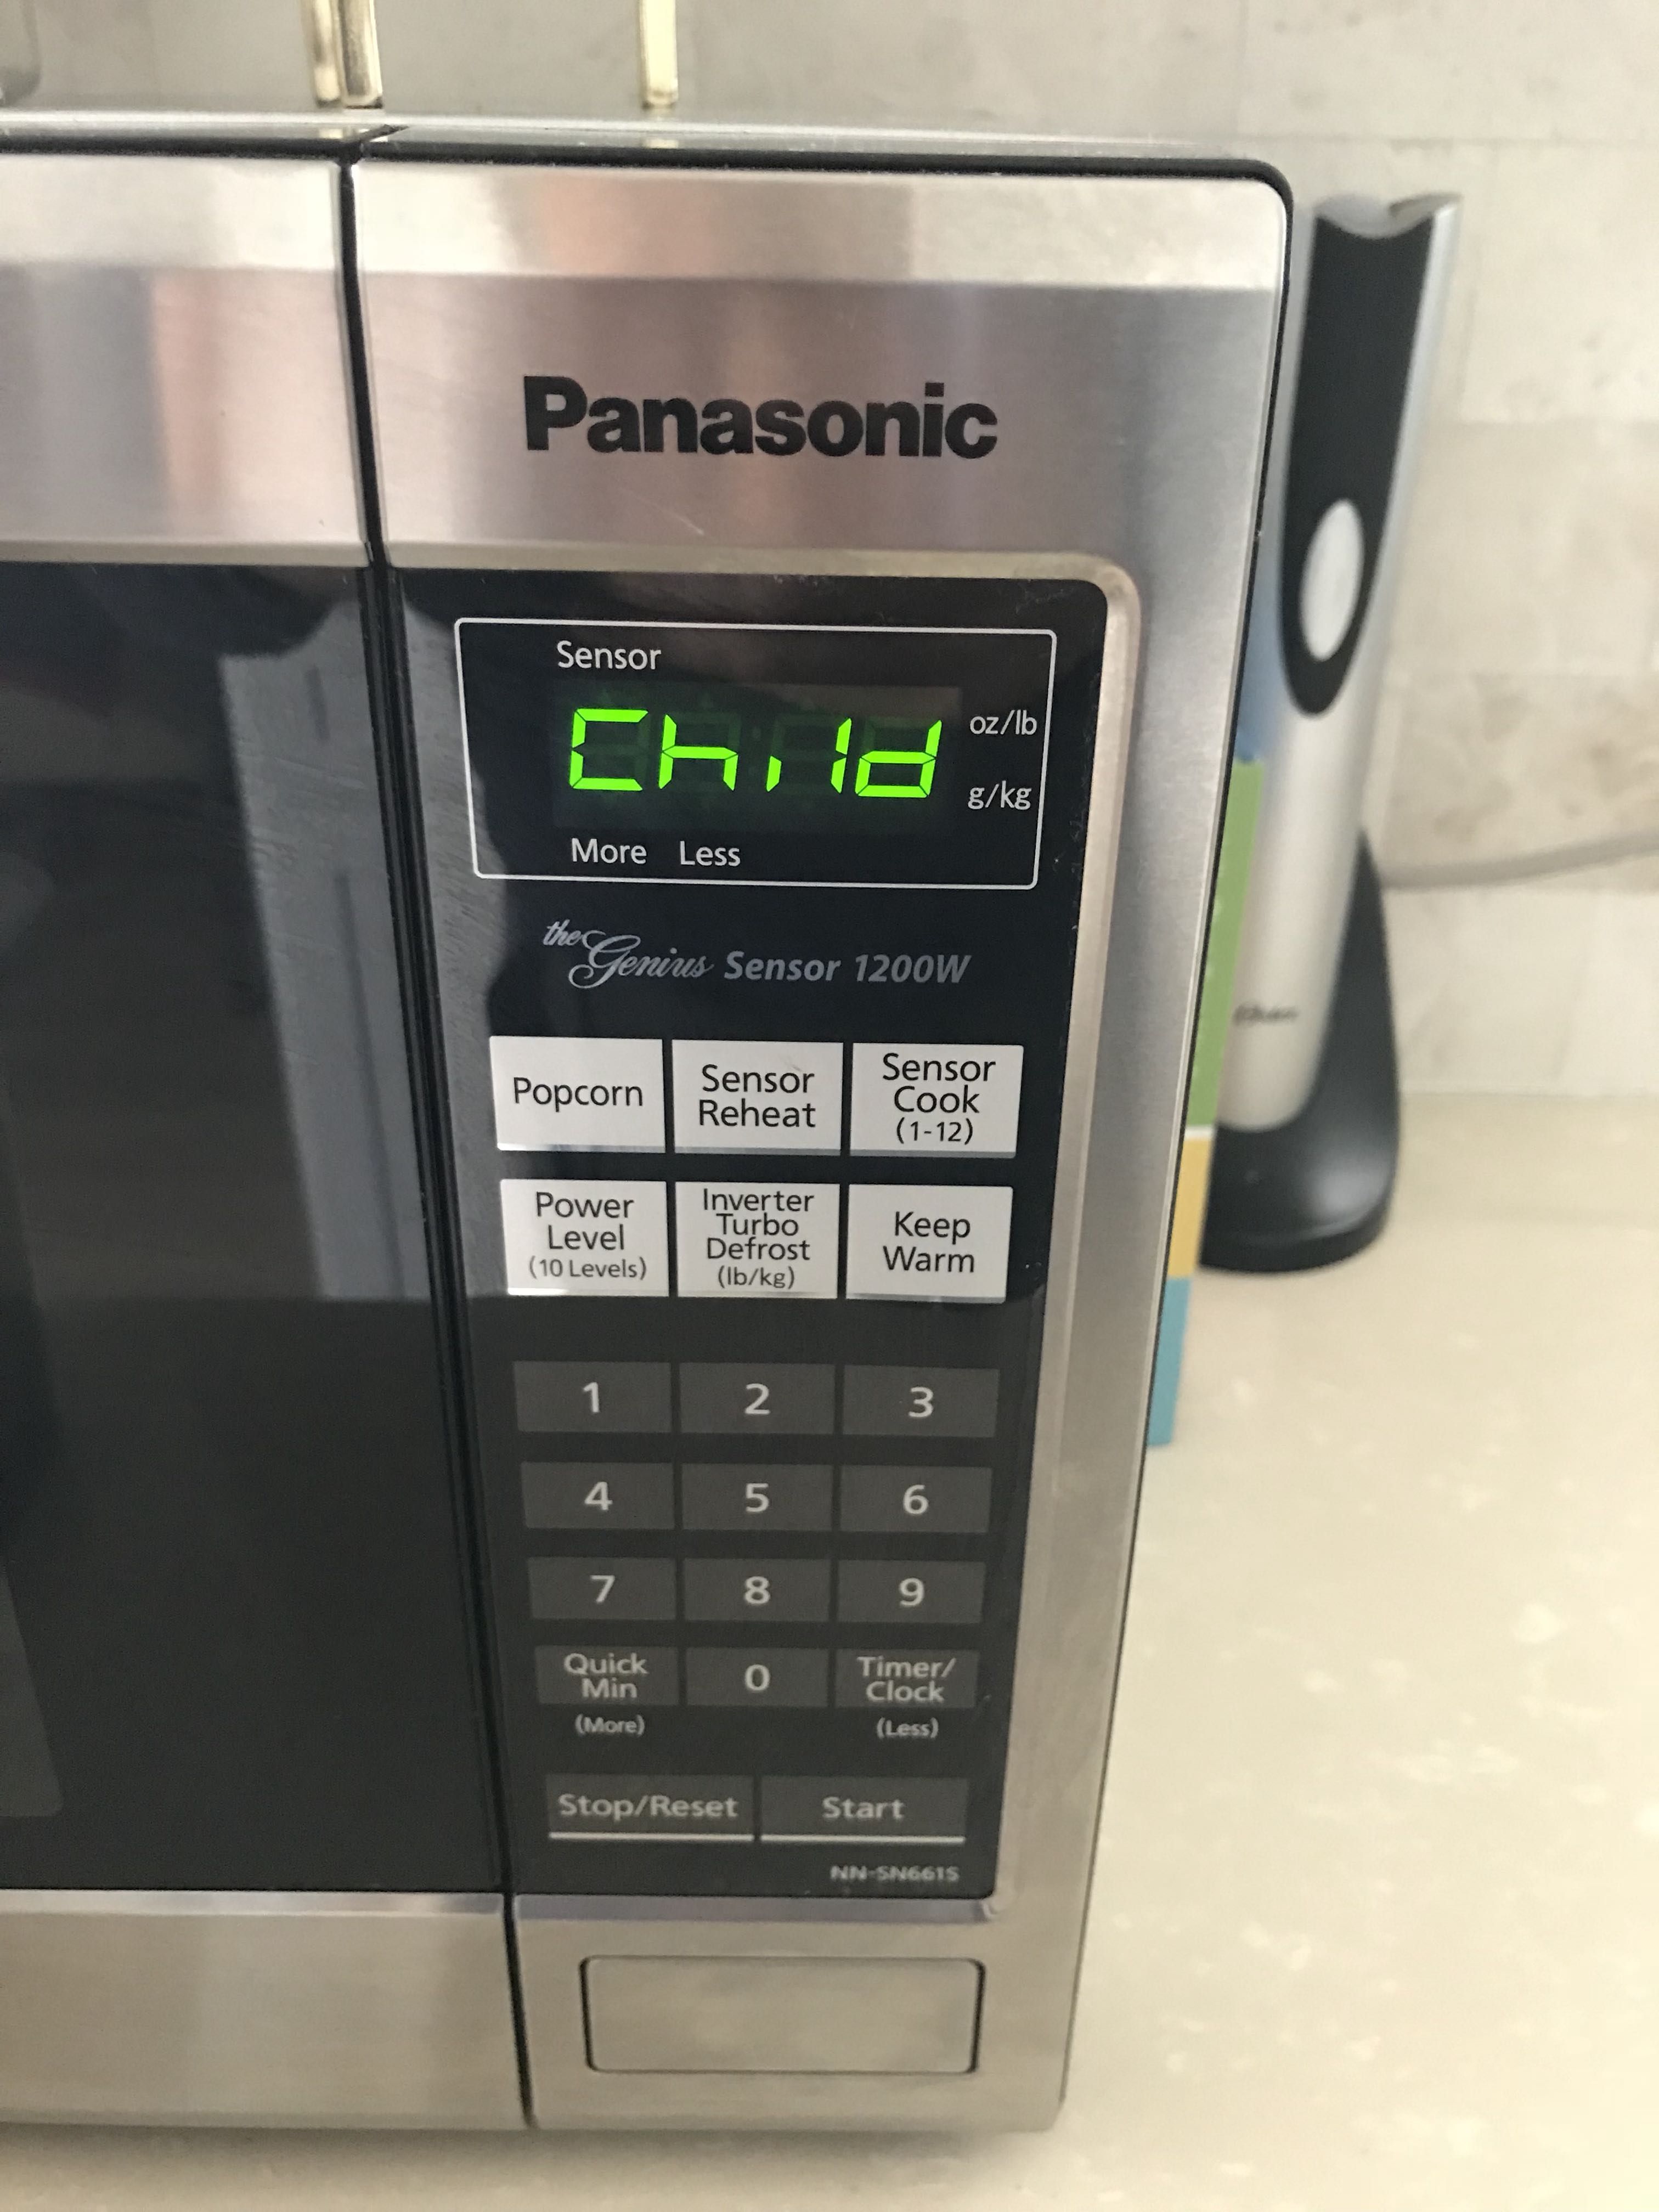 My wife casually mentioned that she forgot to take birth control this weekend... then we woke up to this on our microwave this morning